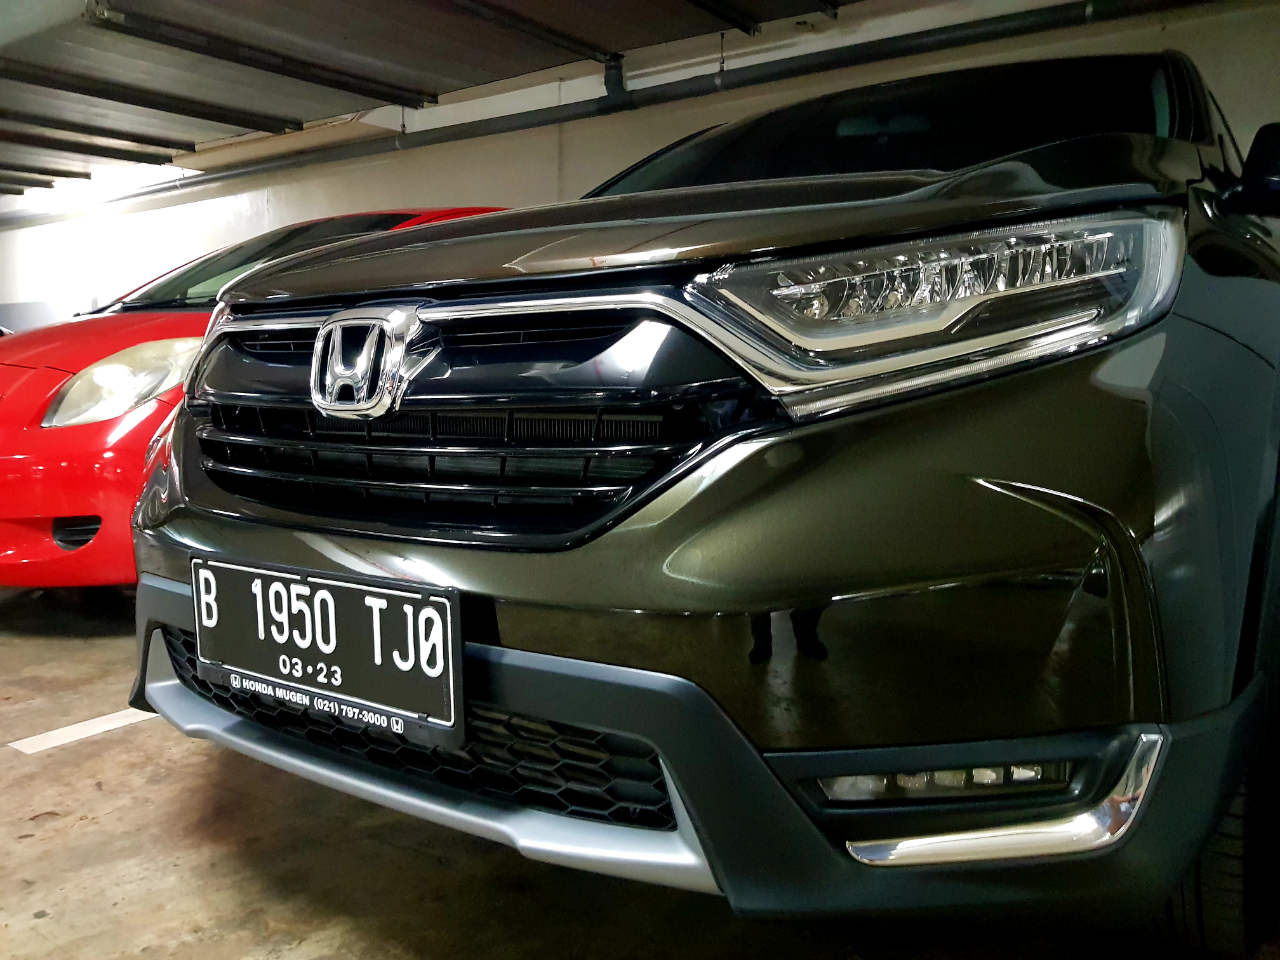 Cage Crv All Generations On Kaskus Welcoming You Part 1